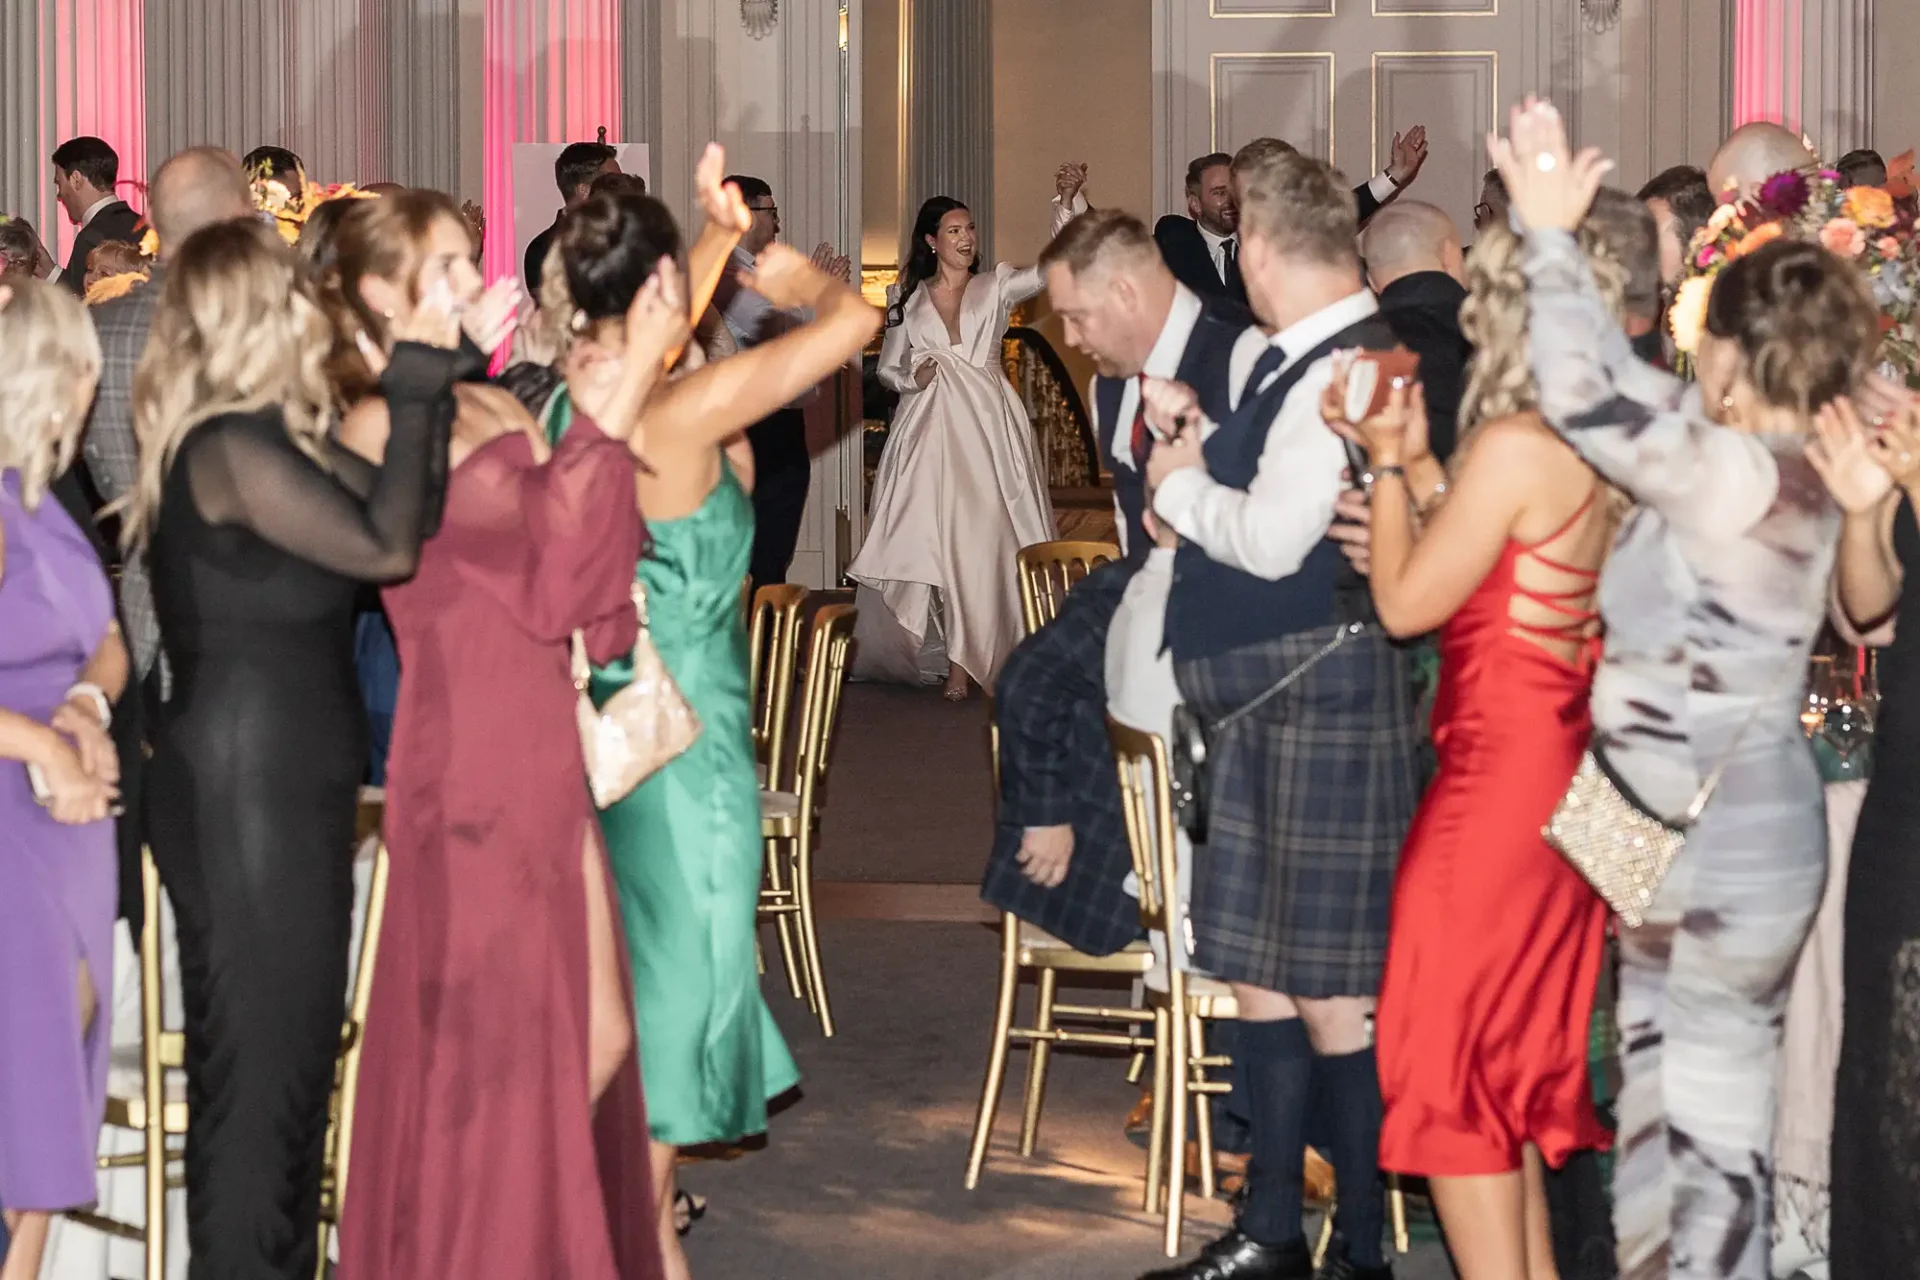 A bride and groom walking through a cheering crowd at a wedding reception, with guests in formal attire clapping and some wearing kilts.